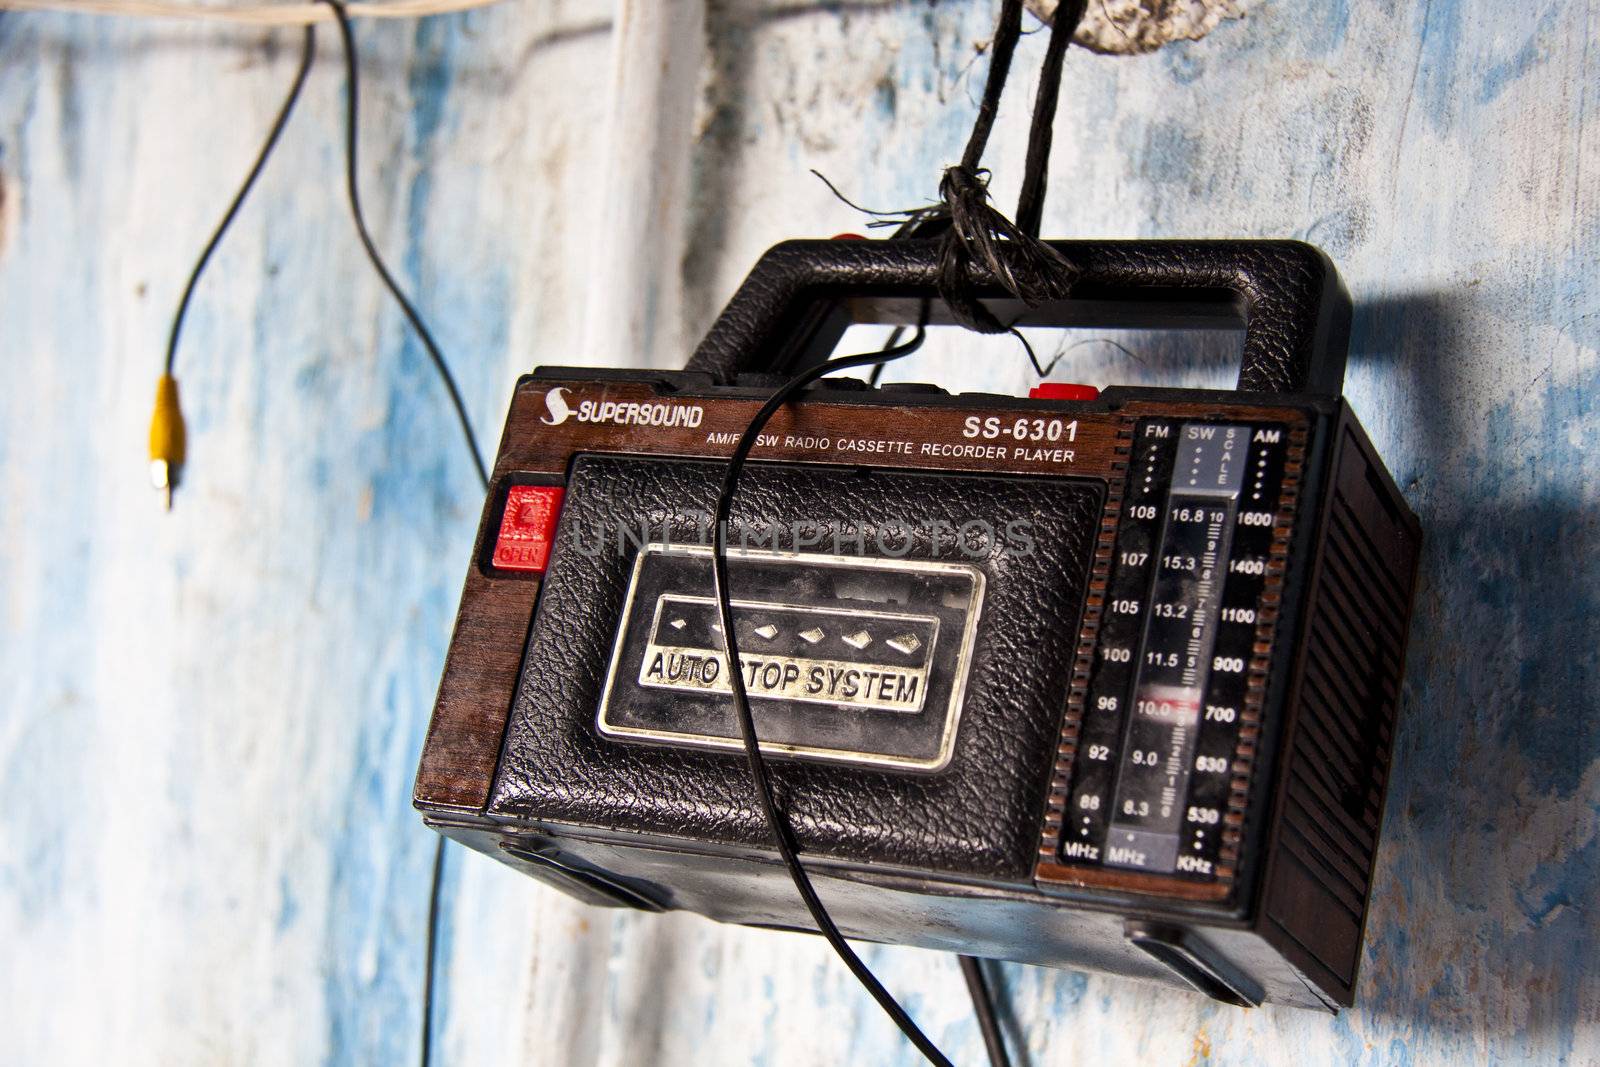 Retro radio with a cassette player hanging on the wall